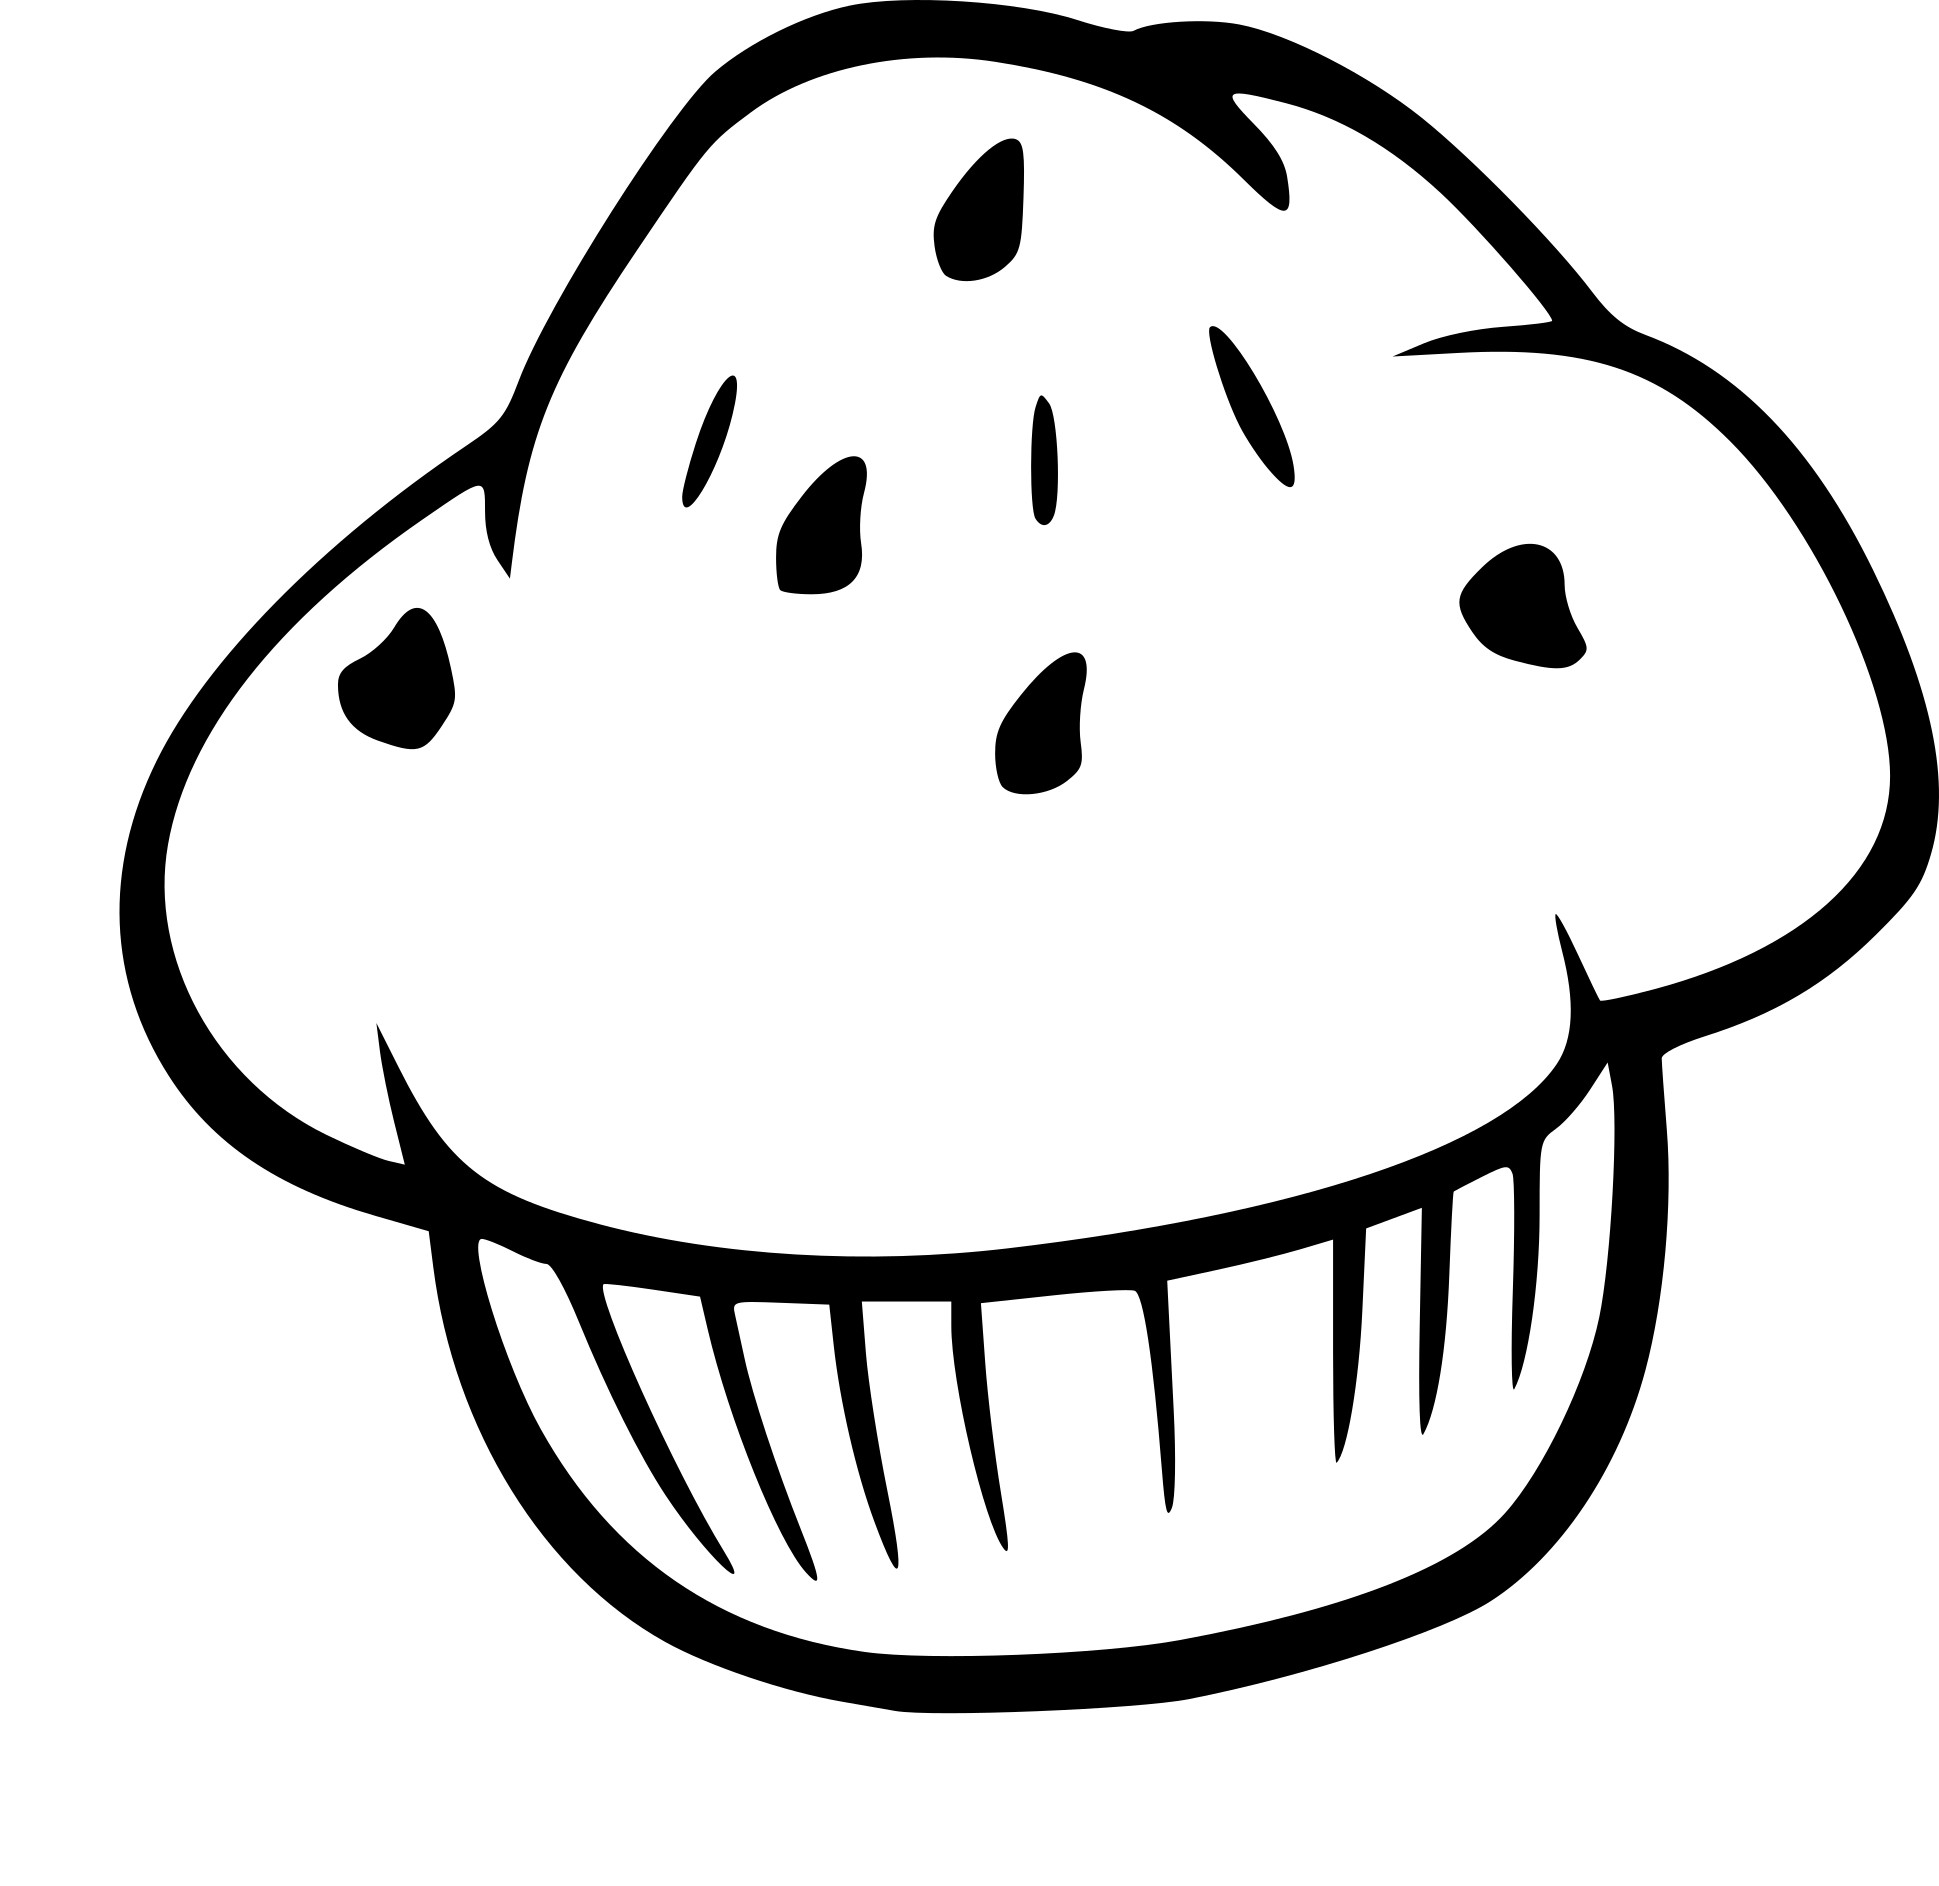 Muffin coloring page